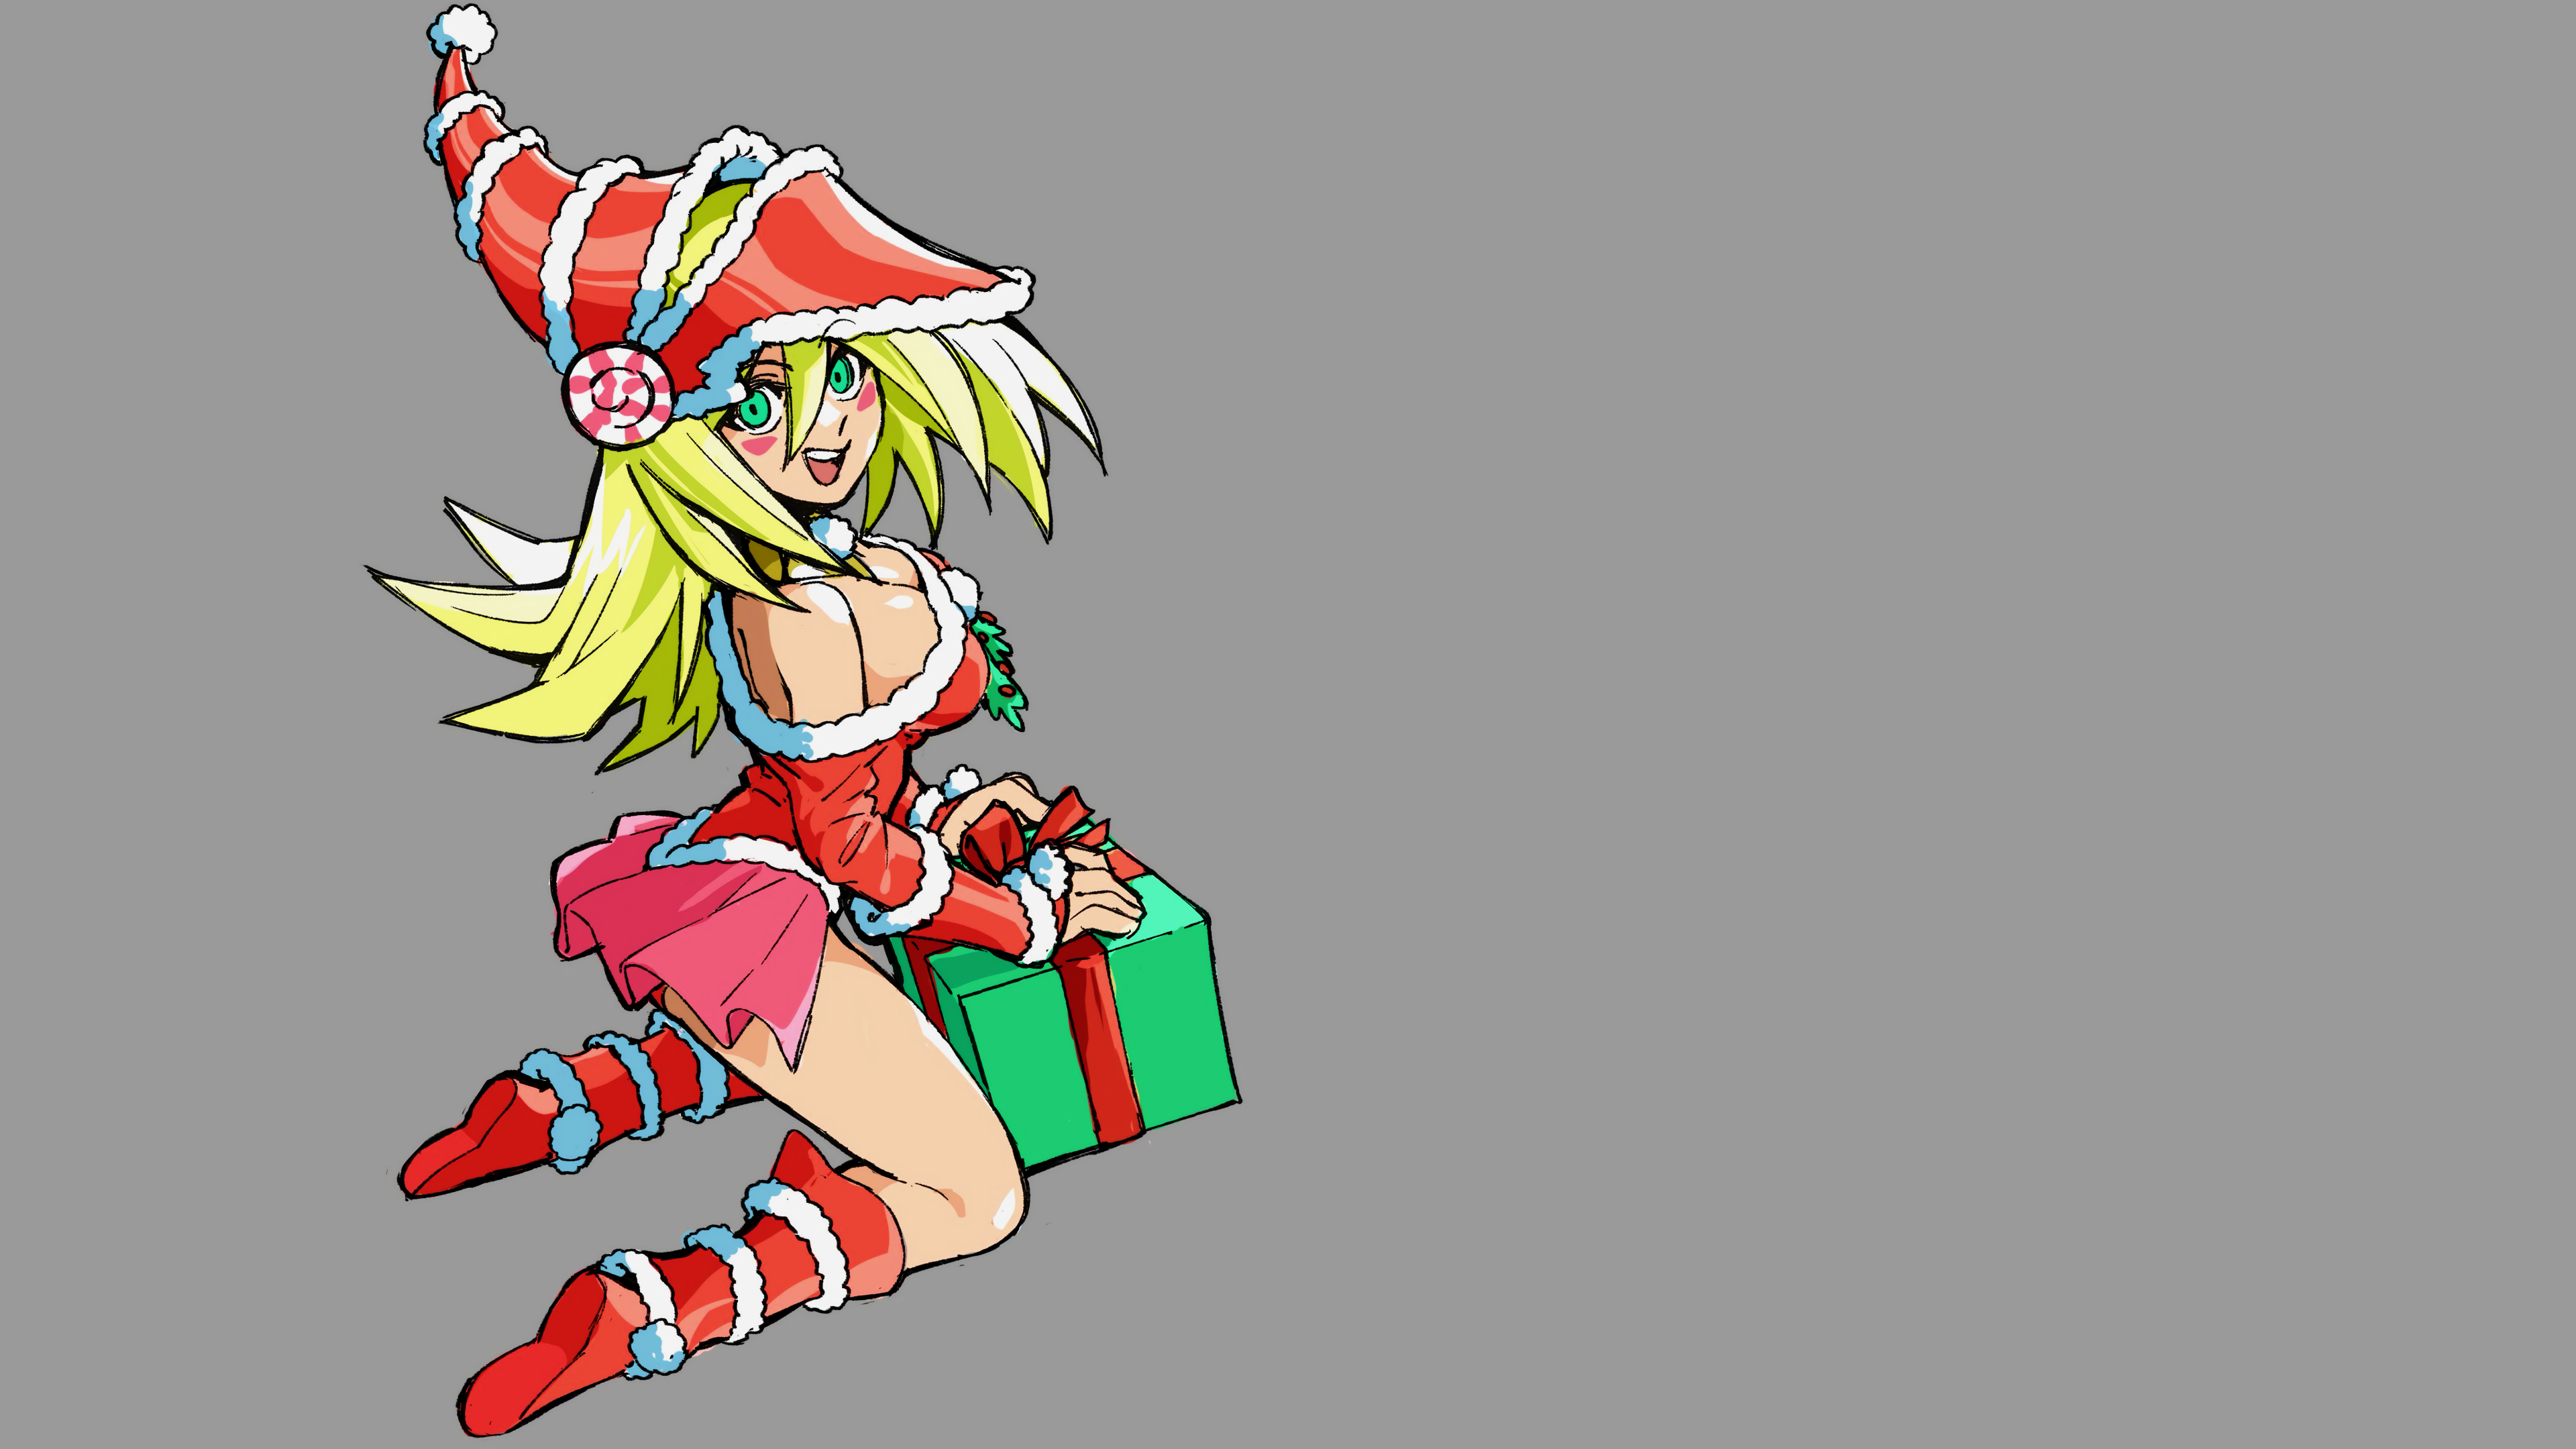 Anime 3840x2160 Yu-Gi-Oh! Dark Magician Girl Christmas presents Christmas clothes christmas dress blonde blue eyes looking at viewer thighs knee-high boots skirt miniskirt anime girls Trading Card Games